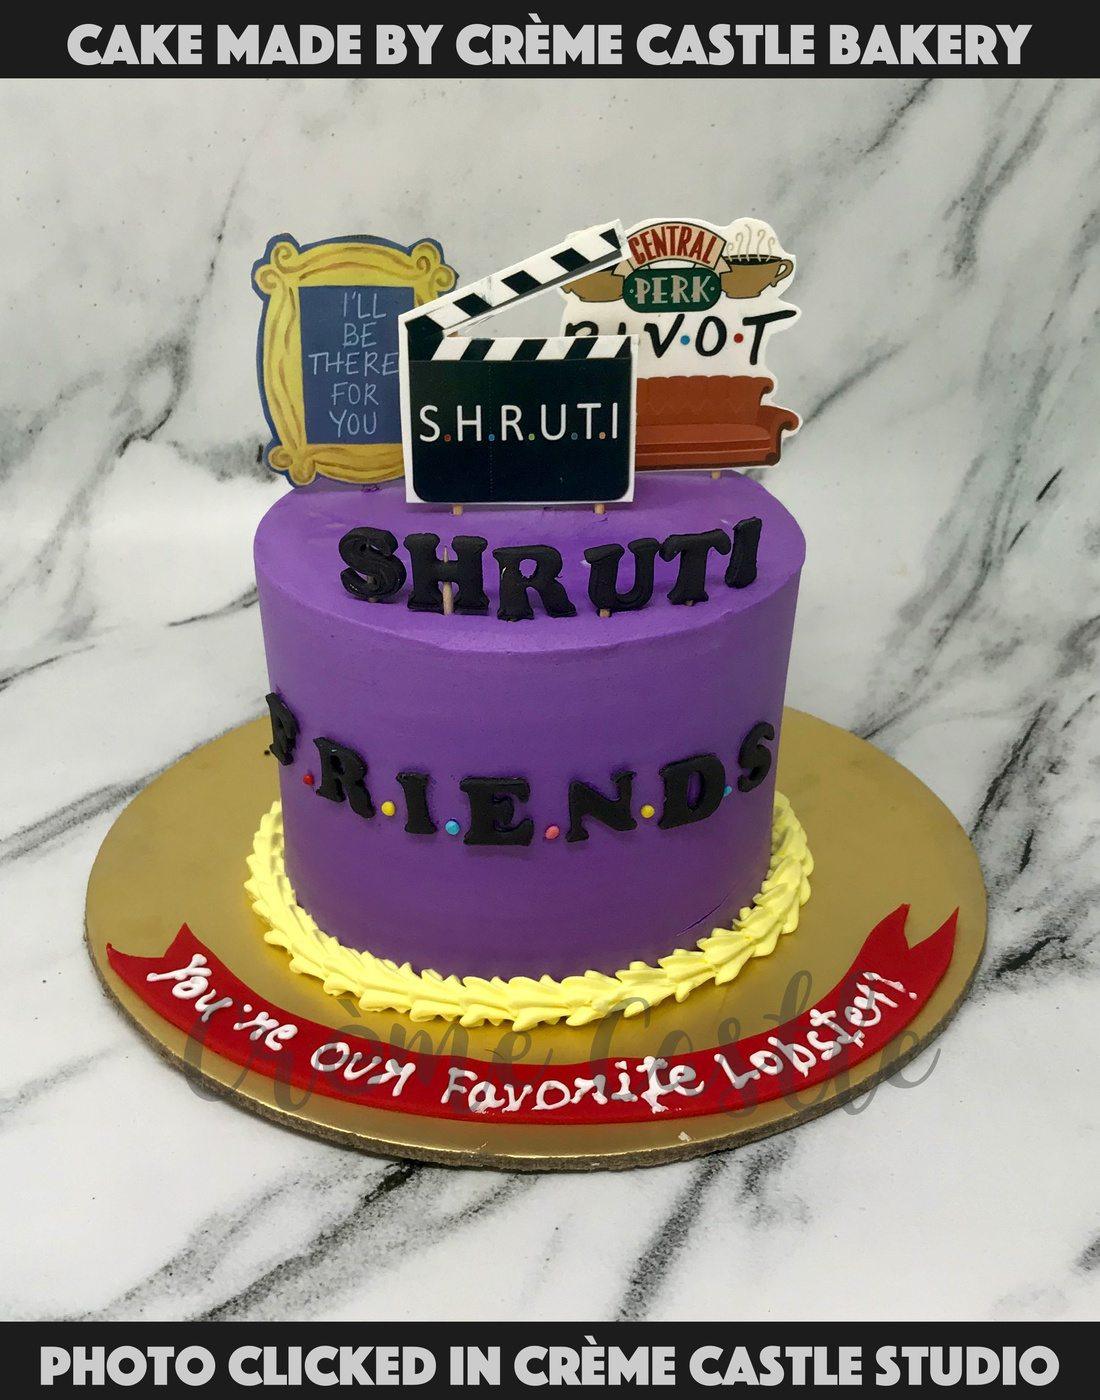 Getting themed and customized cakes in the UAE – FooDee